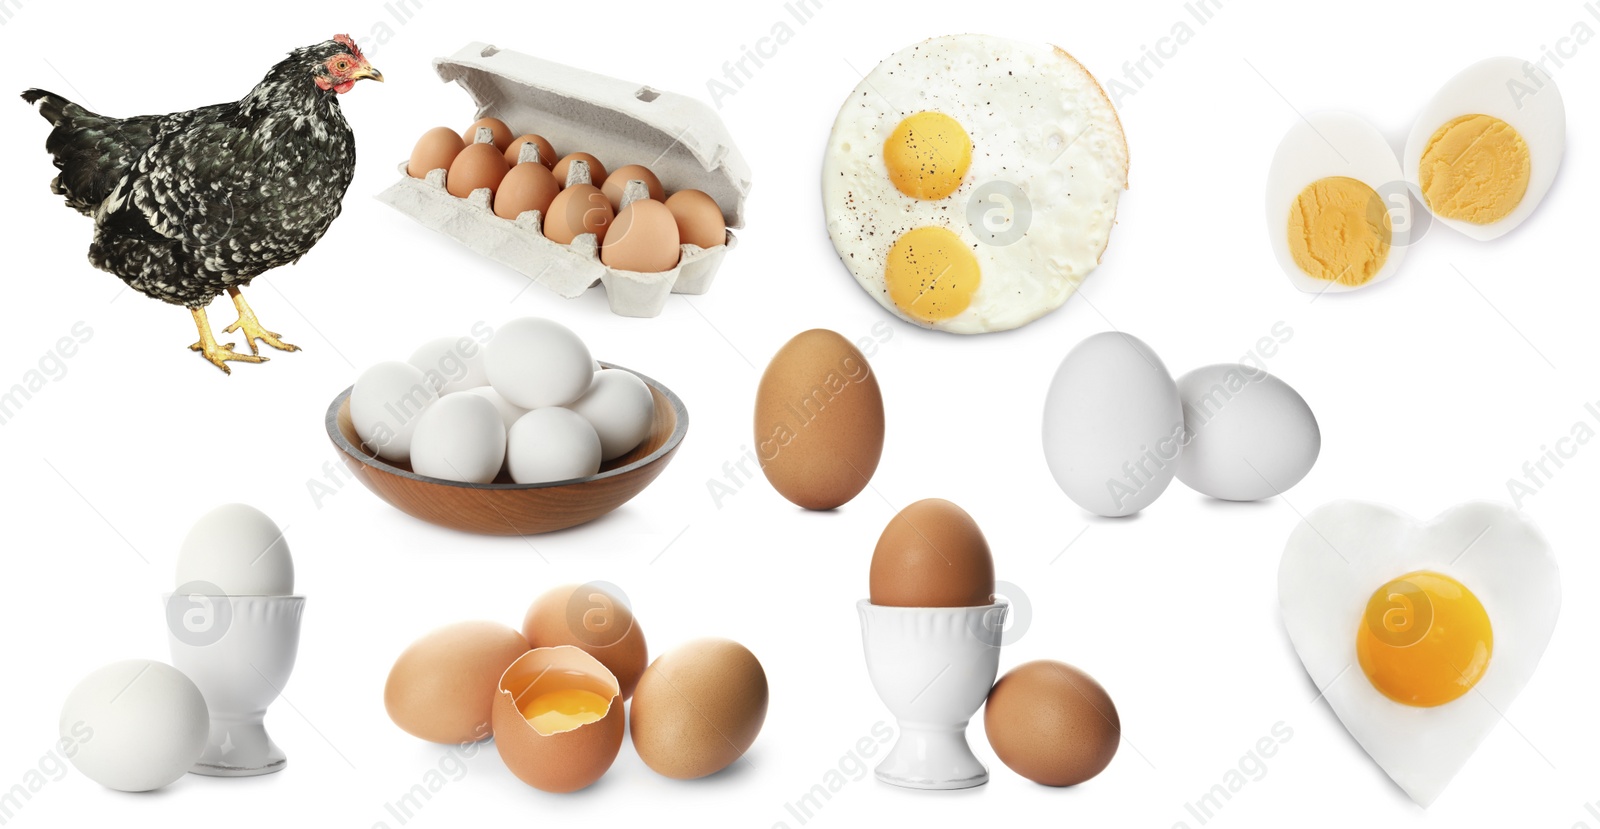 Image of Collage with chicken and eggs on white background. Banner design